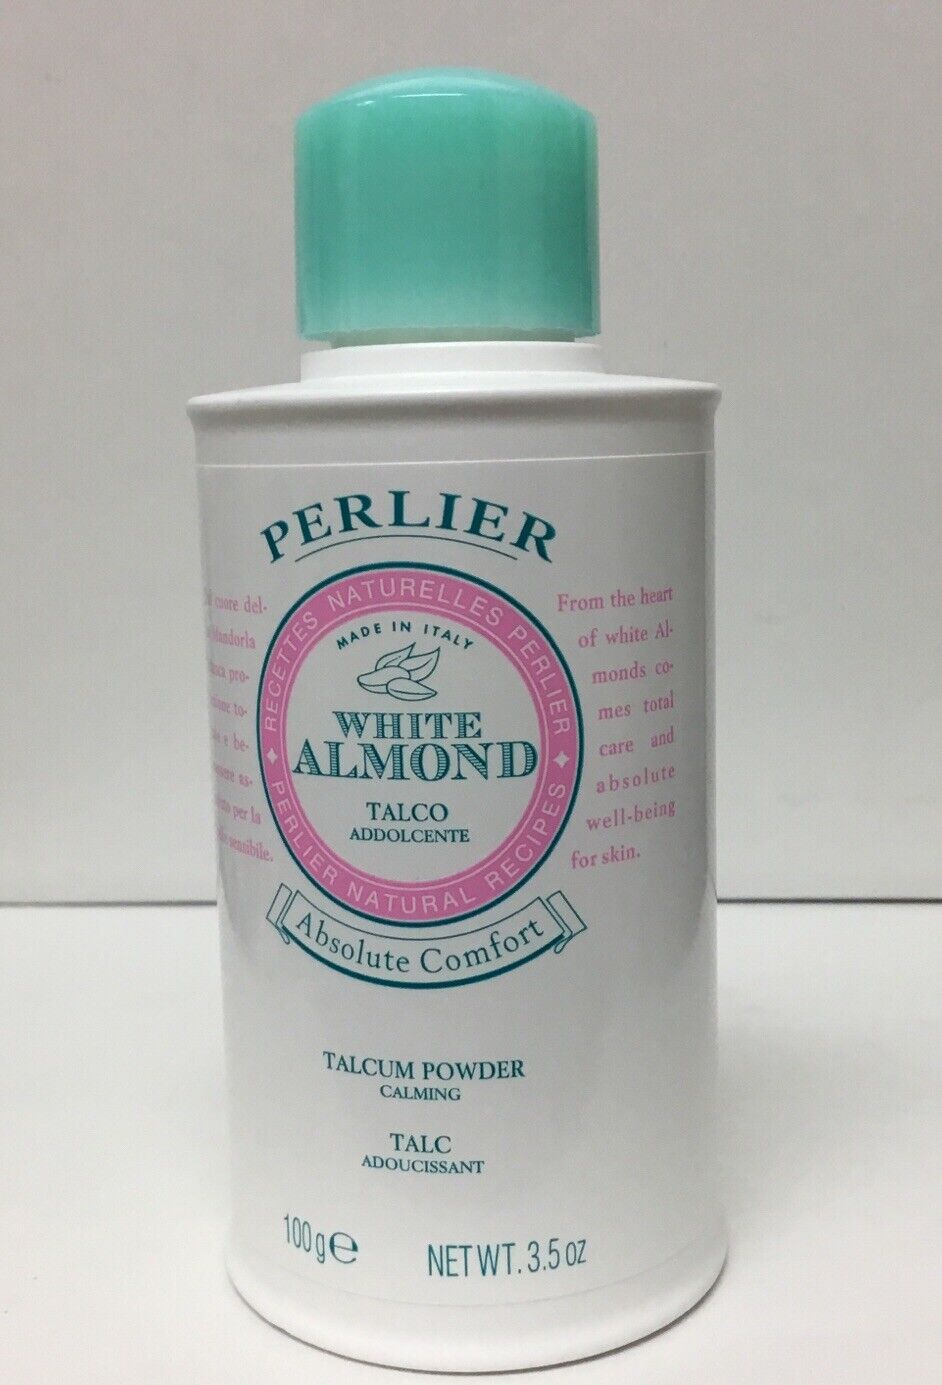 Perlier Absolute Comfort White Almond 3.5oz